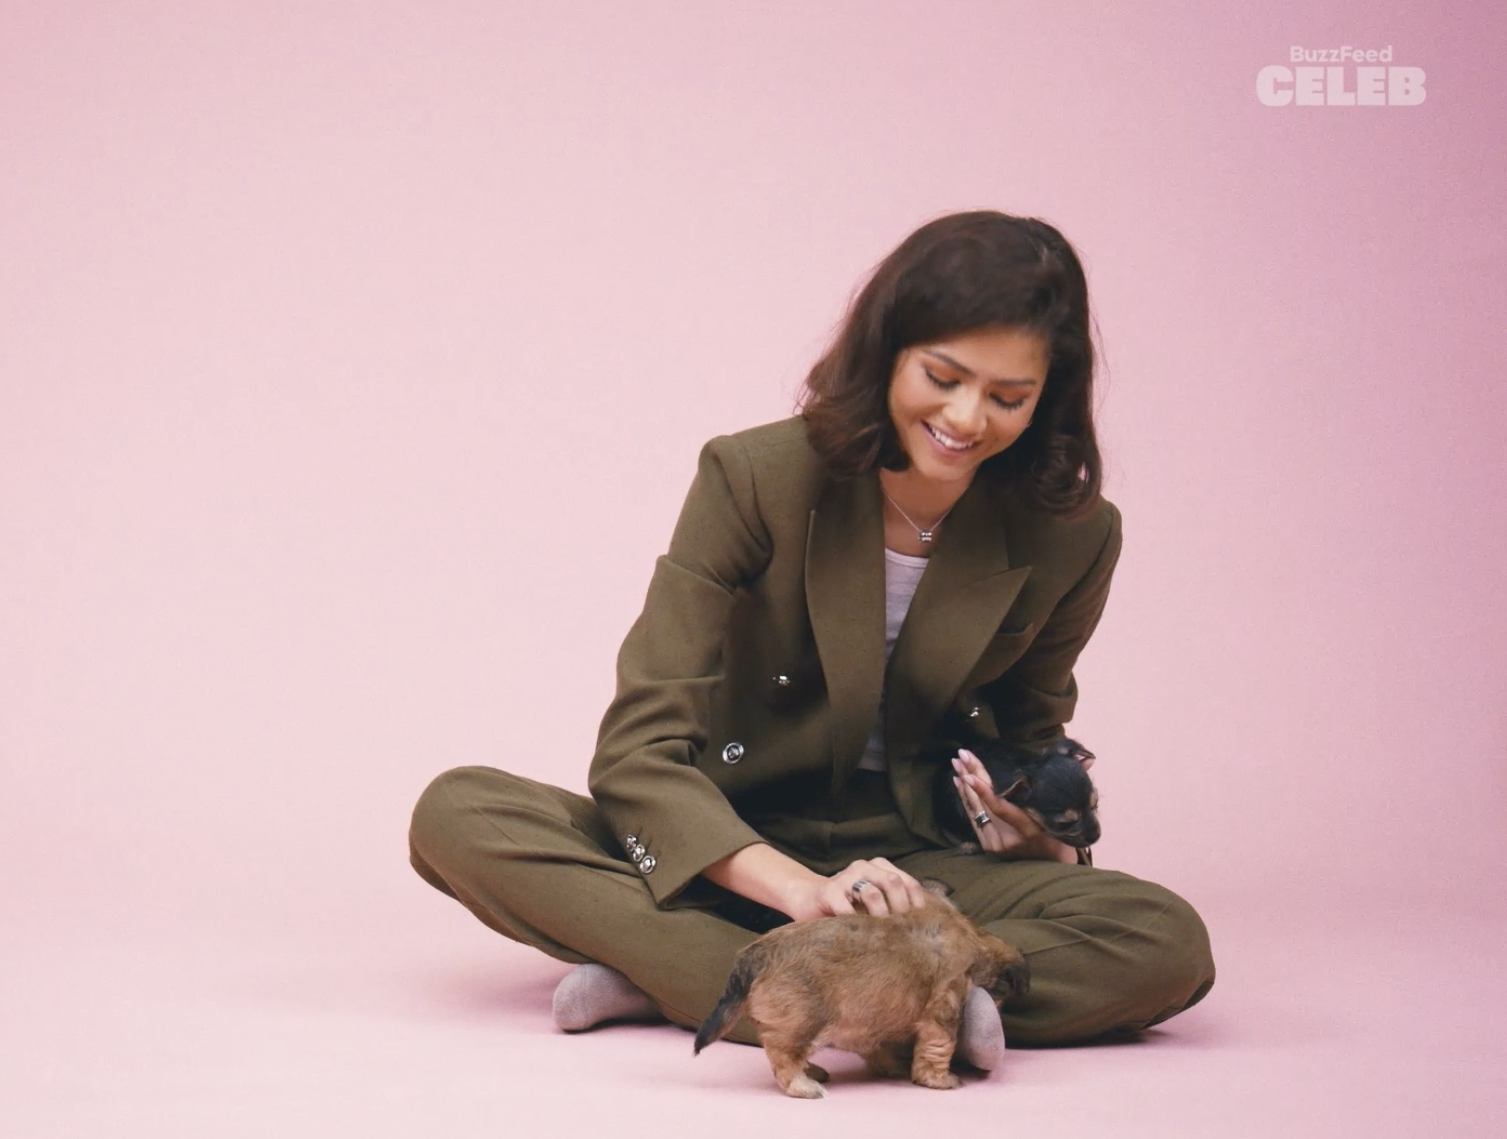 Zendaya, in a pantsuit, kneels and pets a puppy on a pink backdrop, with &quot;Buzzfeed CELEB&quot; logo in the corner